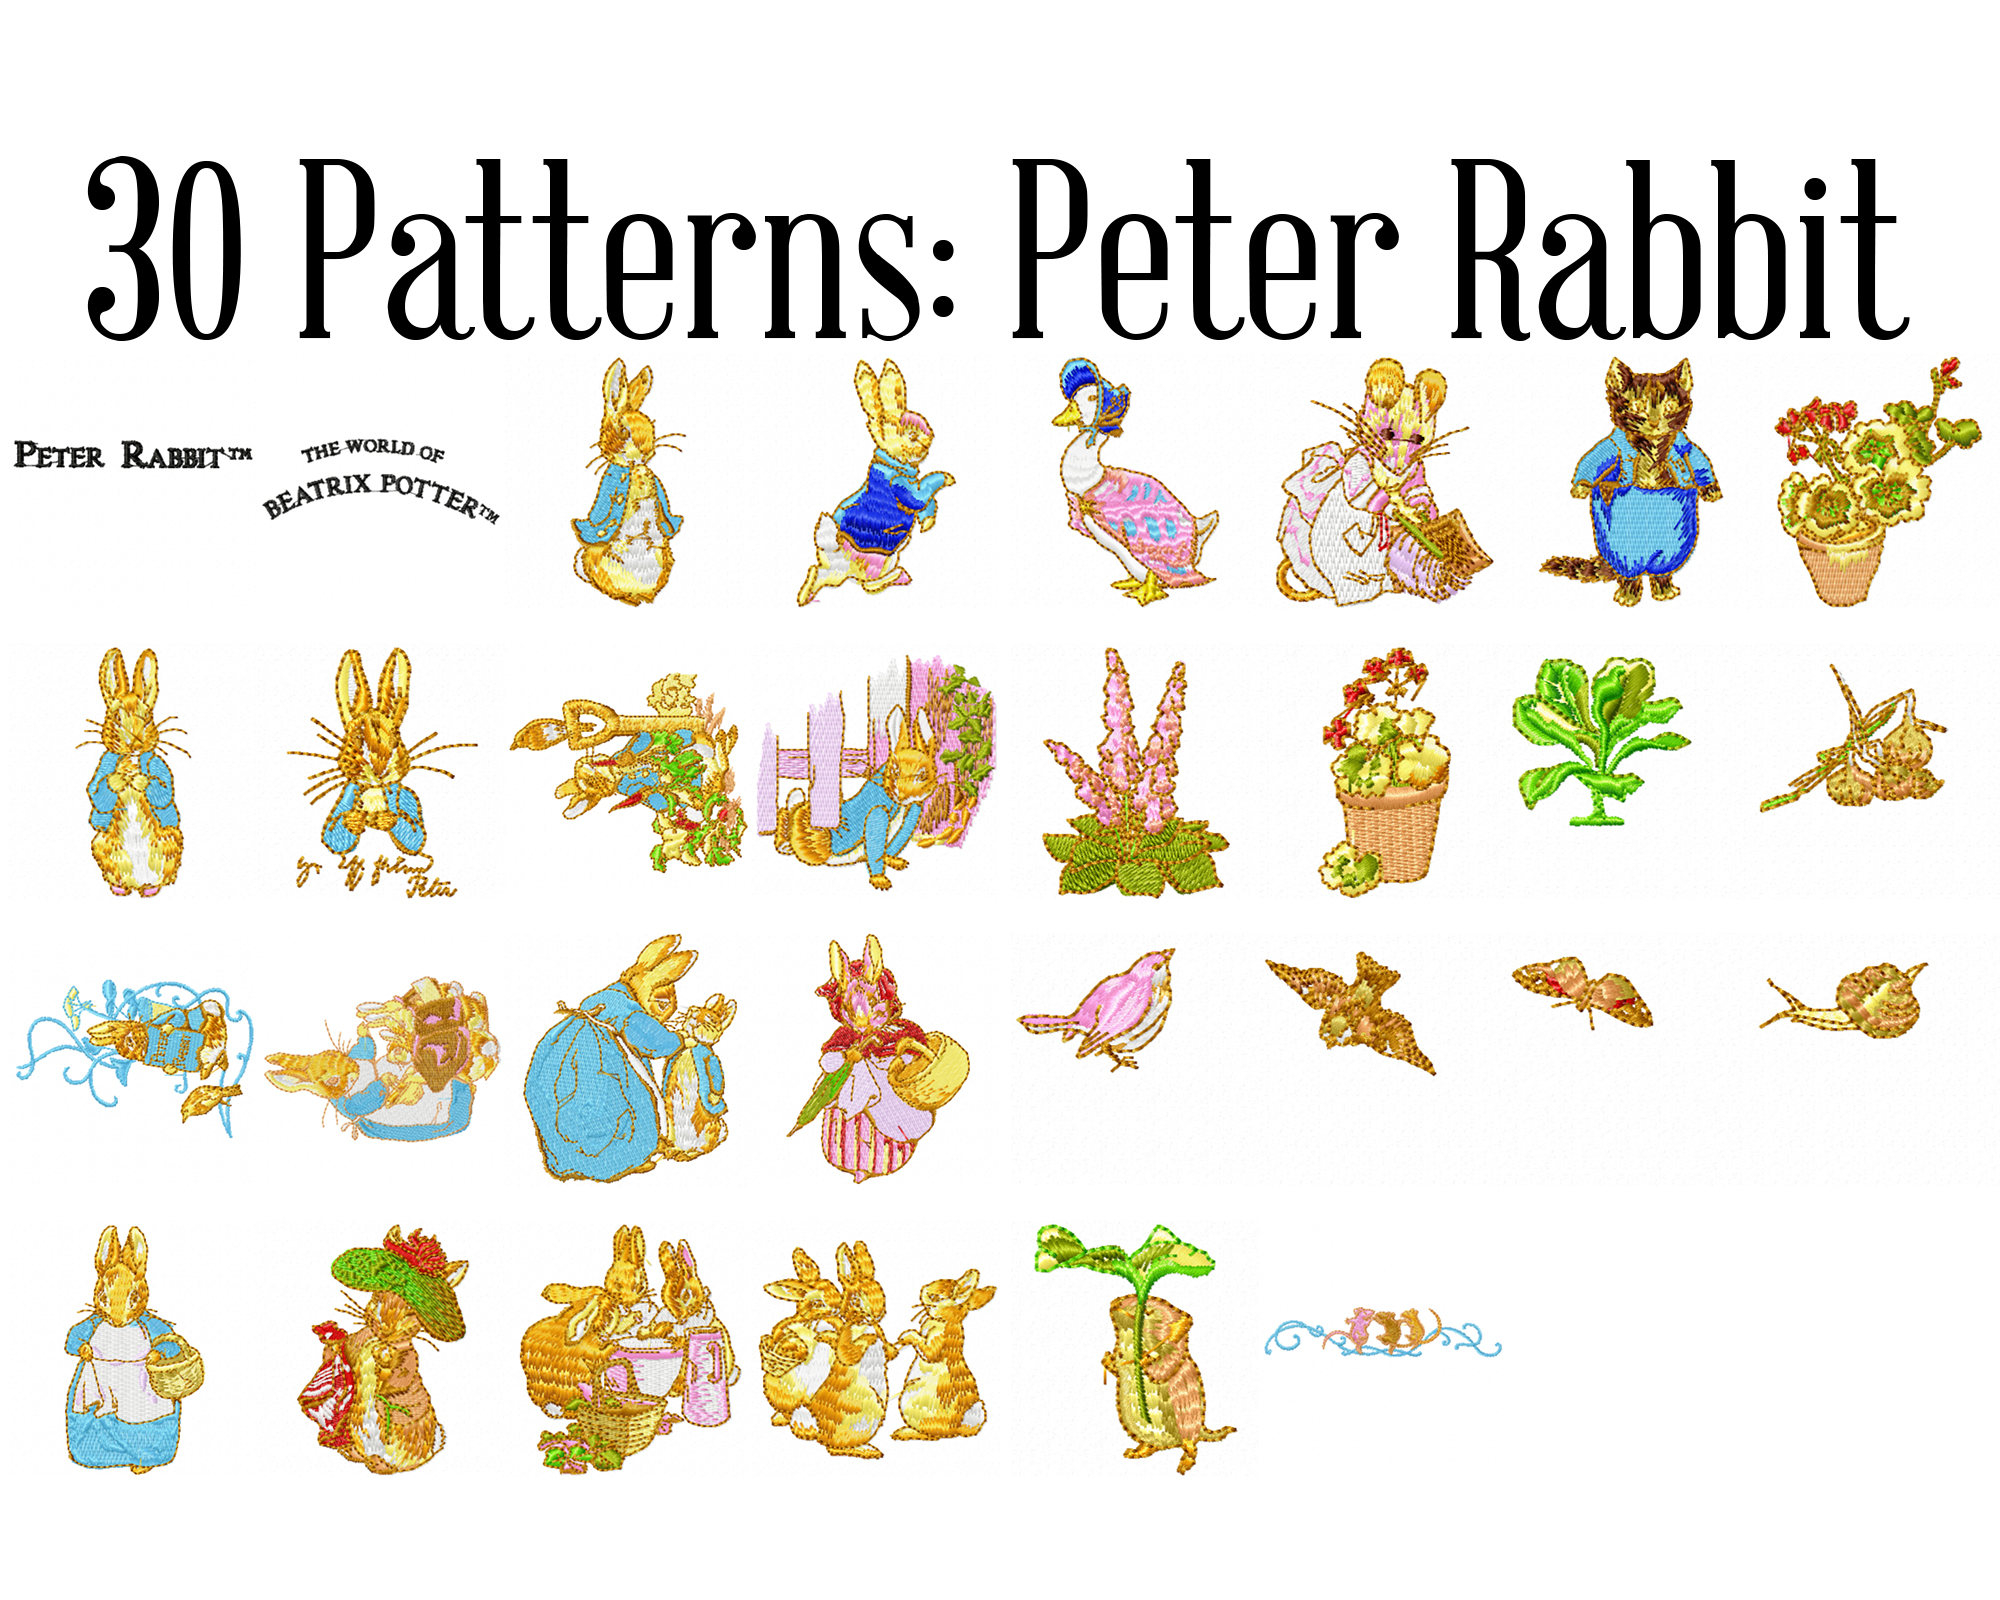 Embroidery Machine Patterns Download Beatrix Potter Peter Rabbit Machine Embroidery Patterns Peter Rabbit Embroidery Peter Rabbit Design Beatrix Potter Patch Instant Download